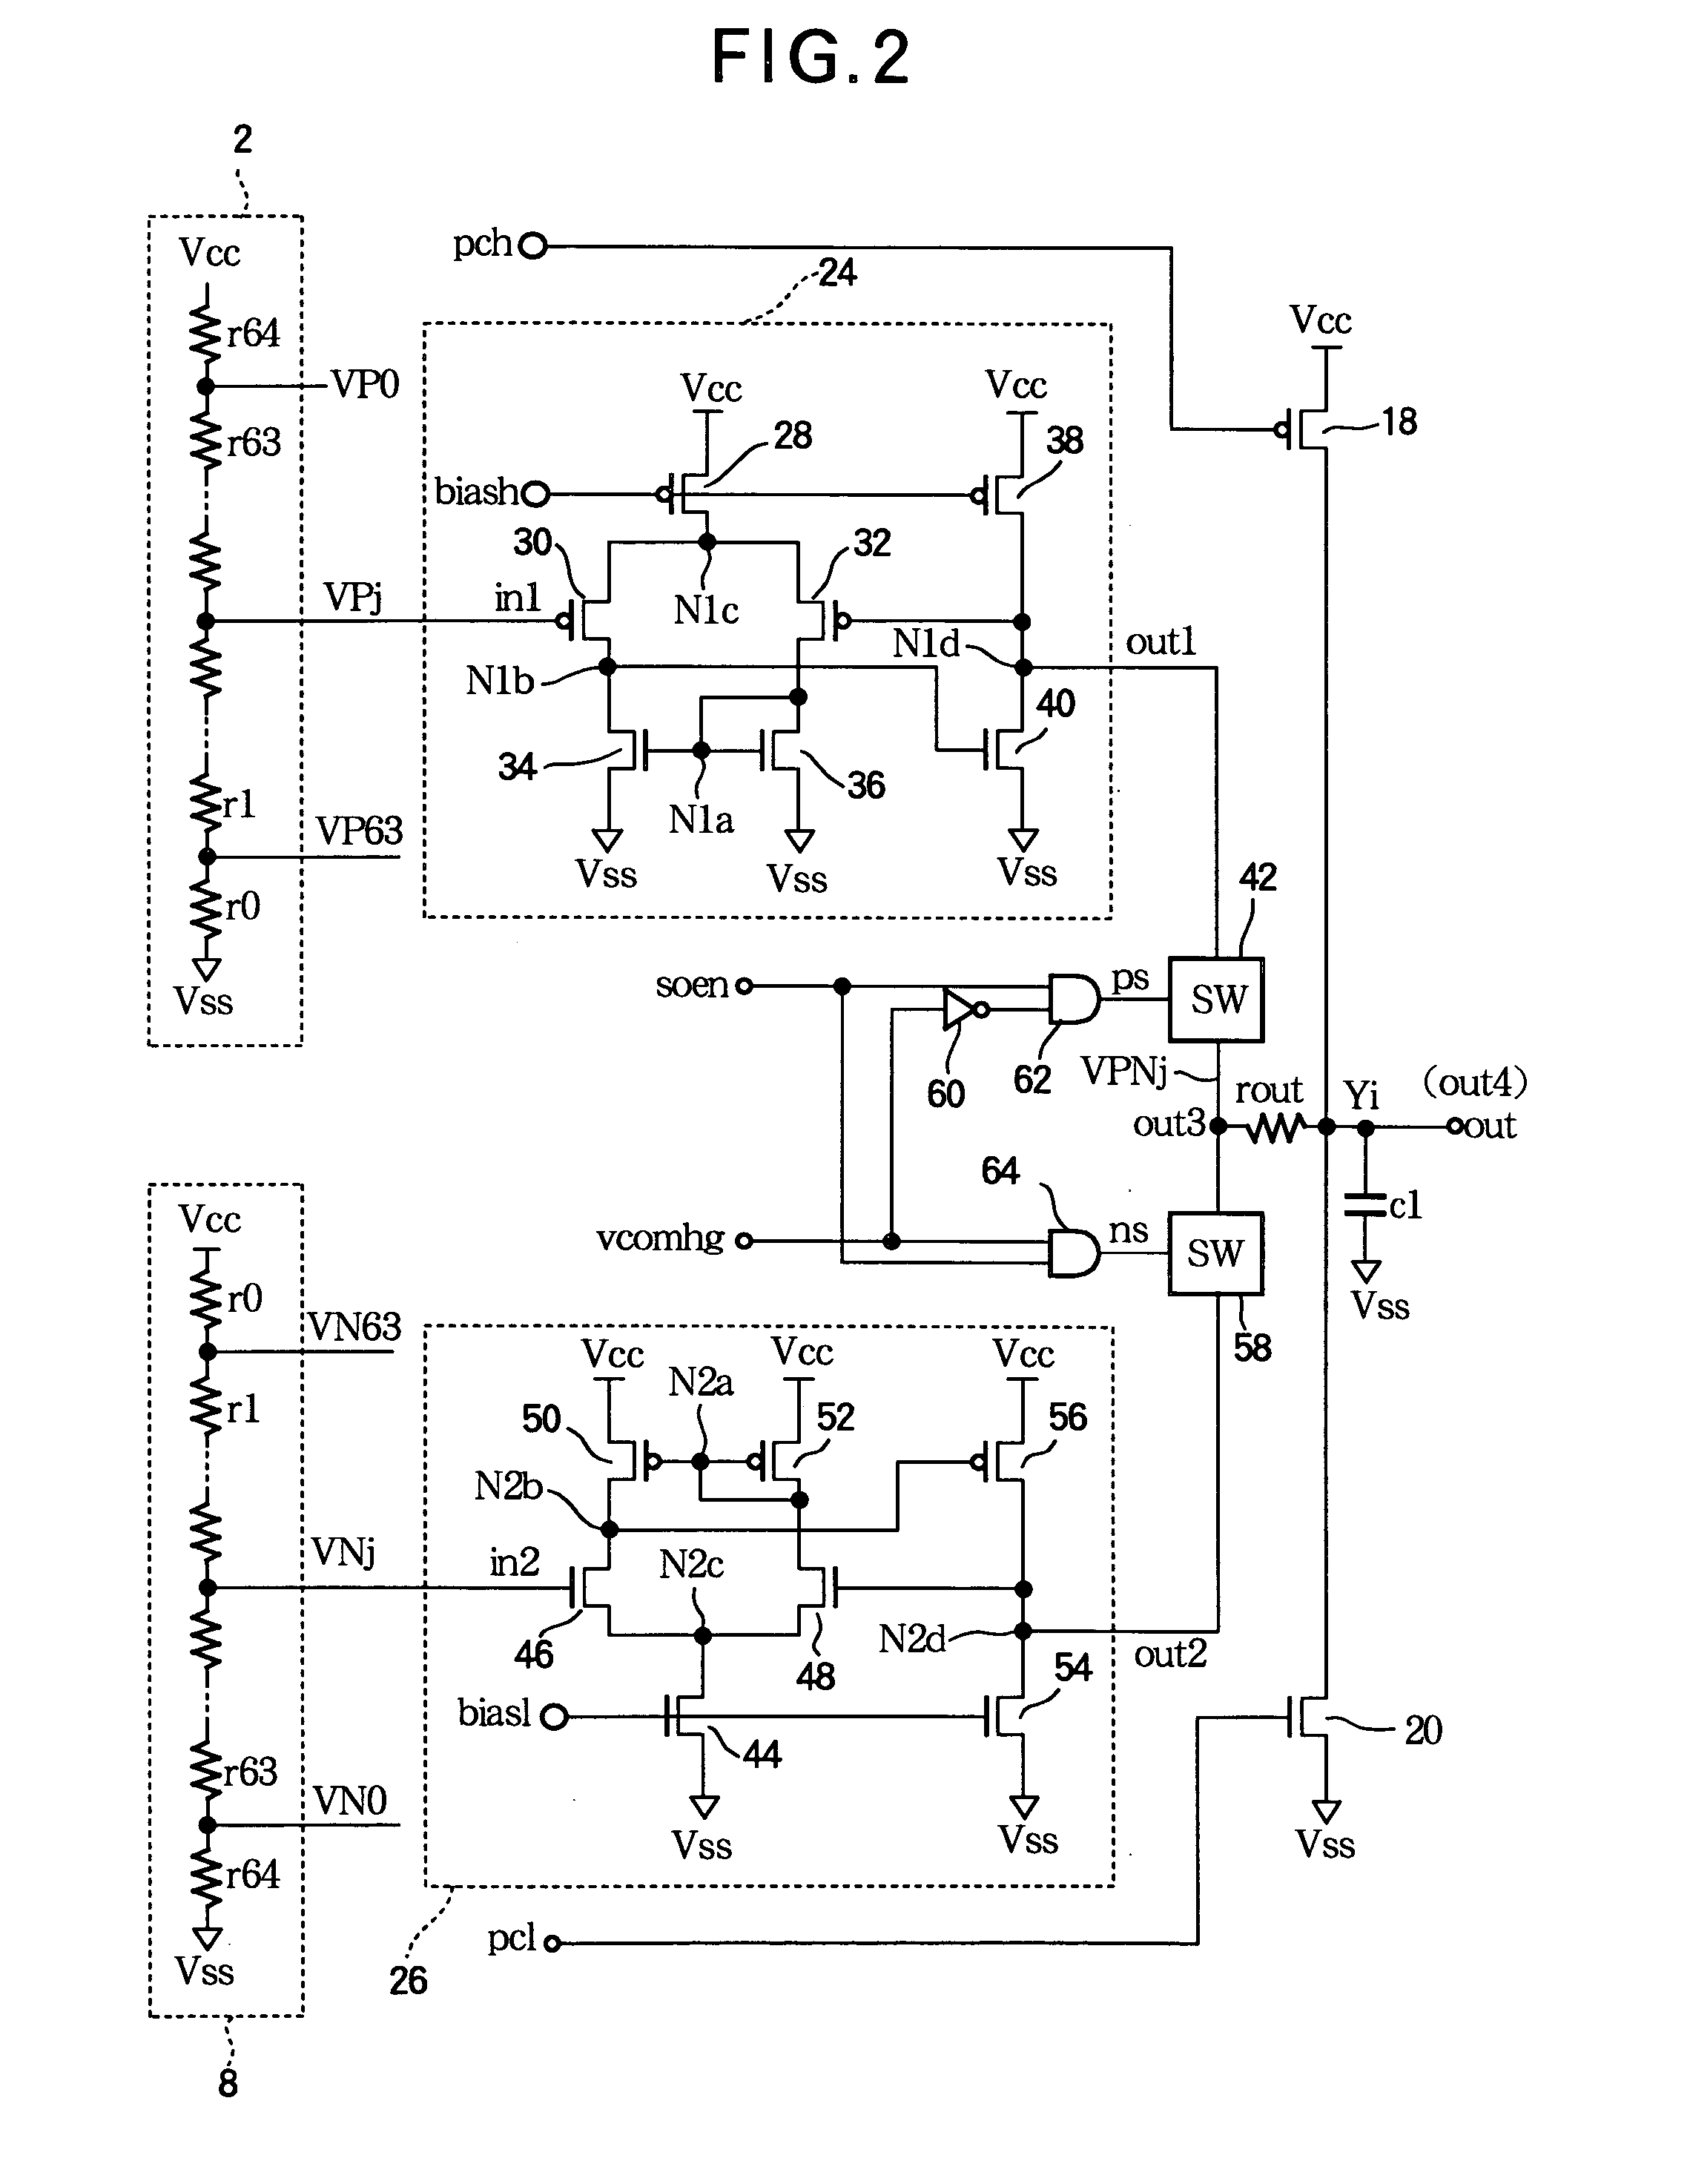 Voltage generating circuit with two resistor ladders